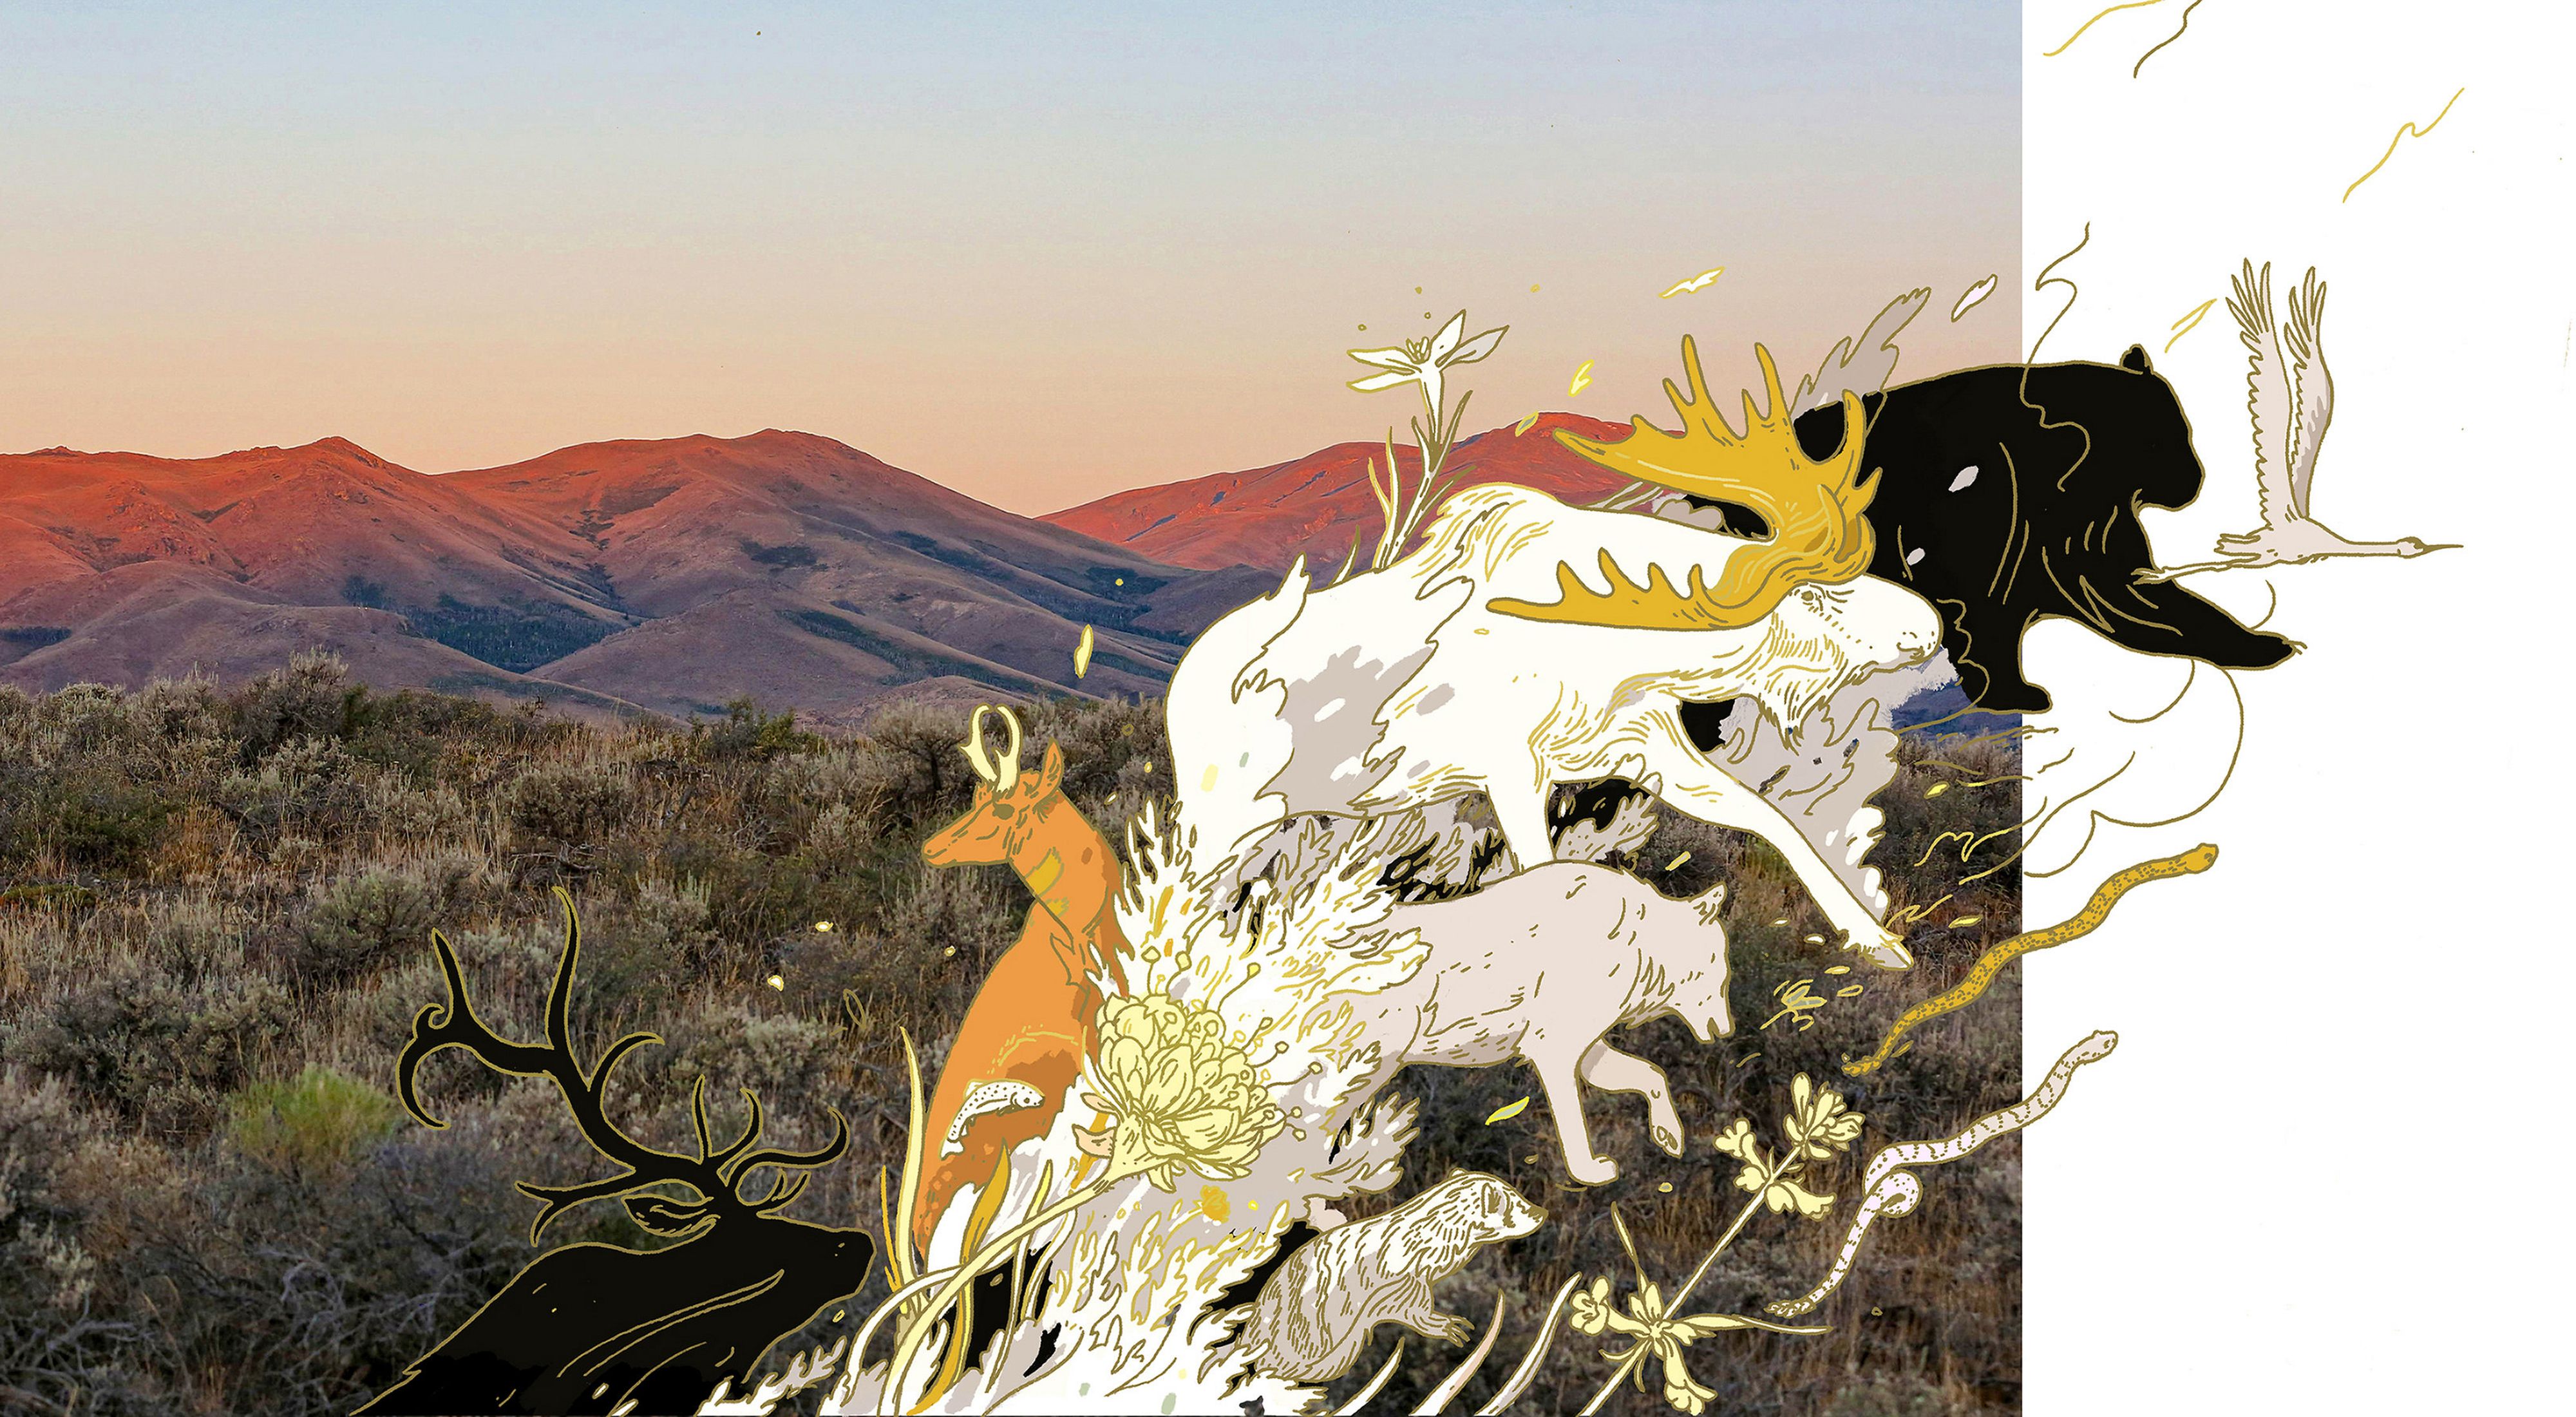 Illustrated animals move across a forest and mountains landscape.